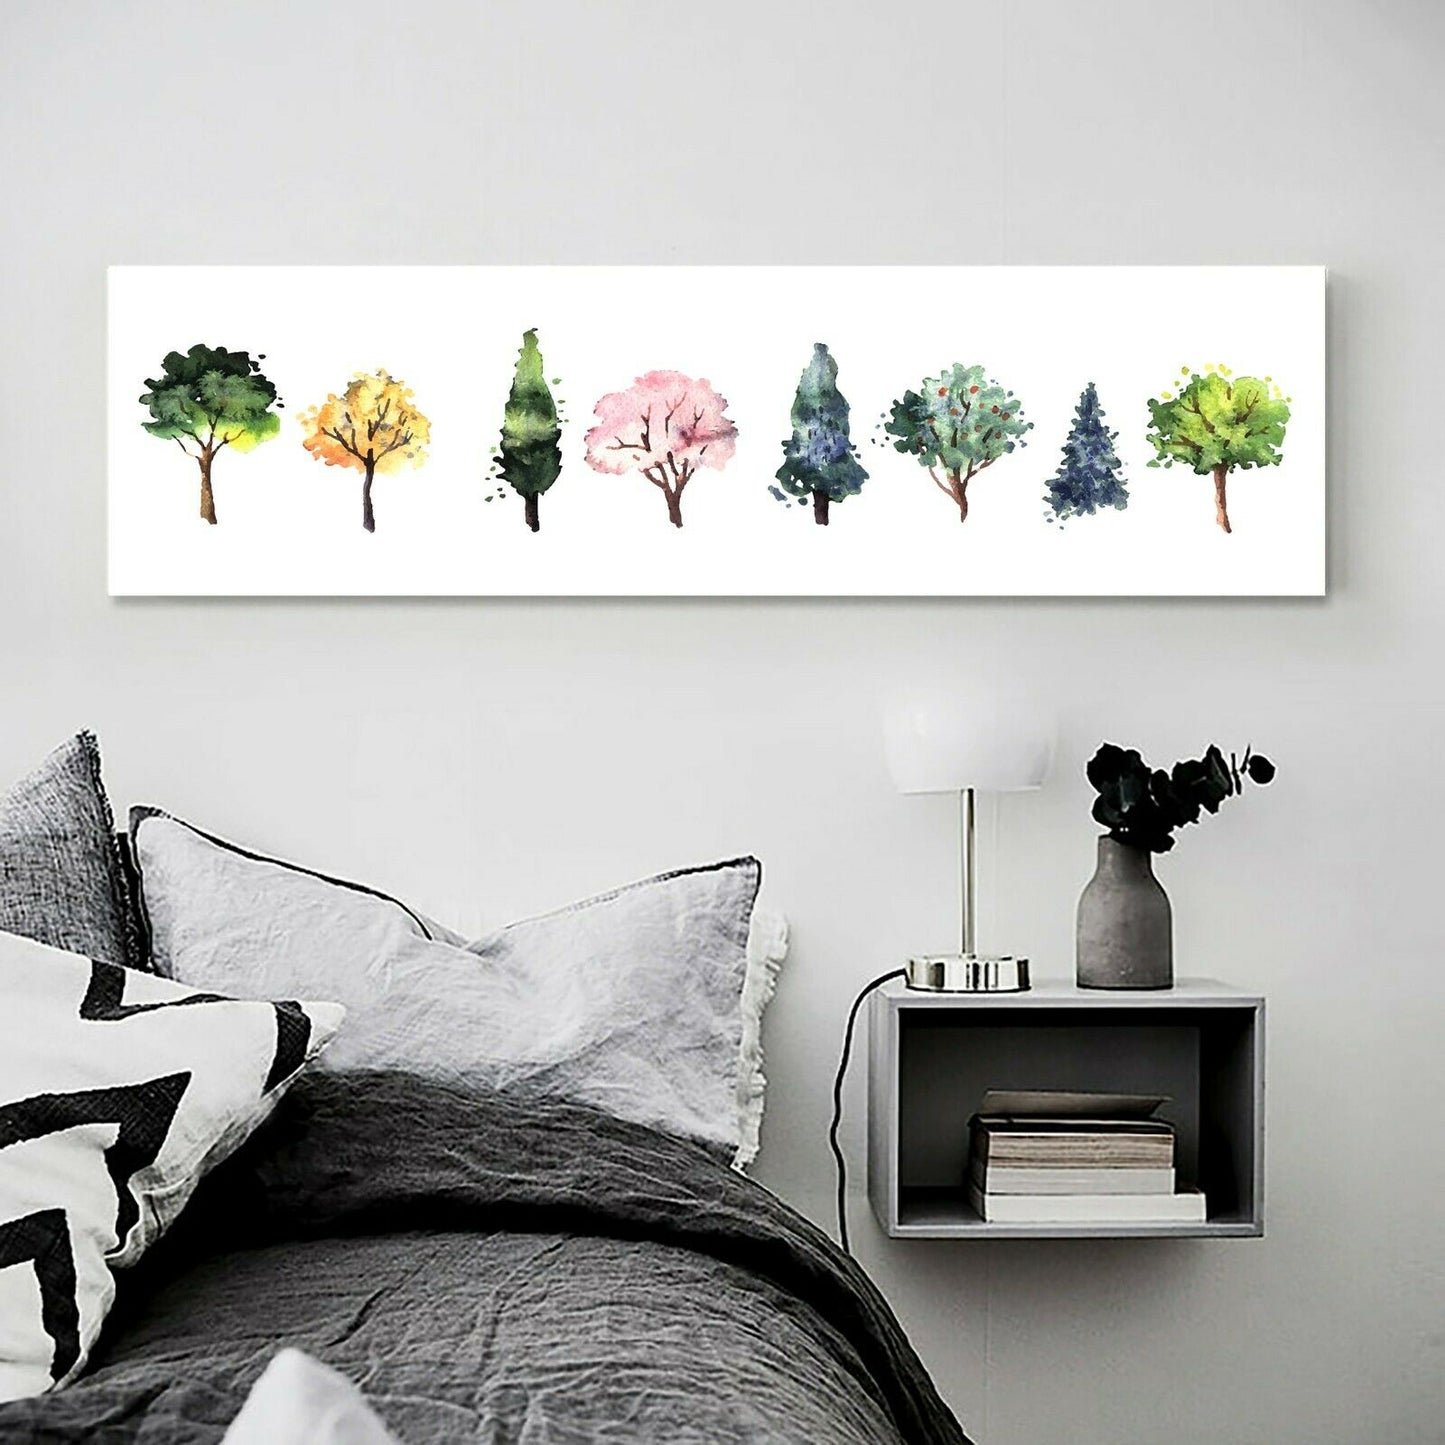 Colorful Trees Stretched Canvas Prints Framed Wall Art Home Decor Watercolor